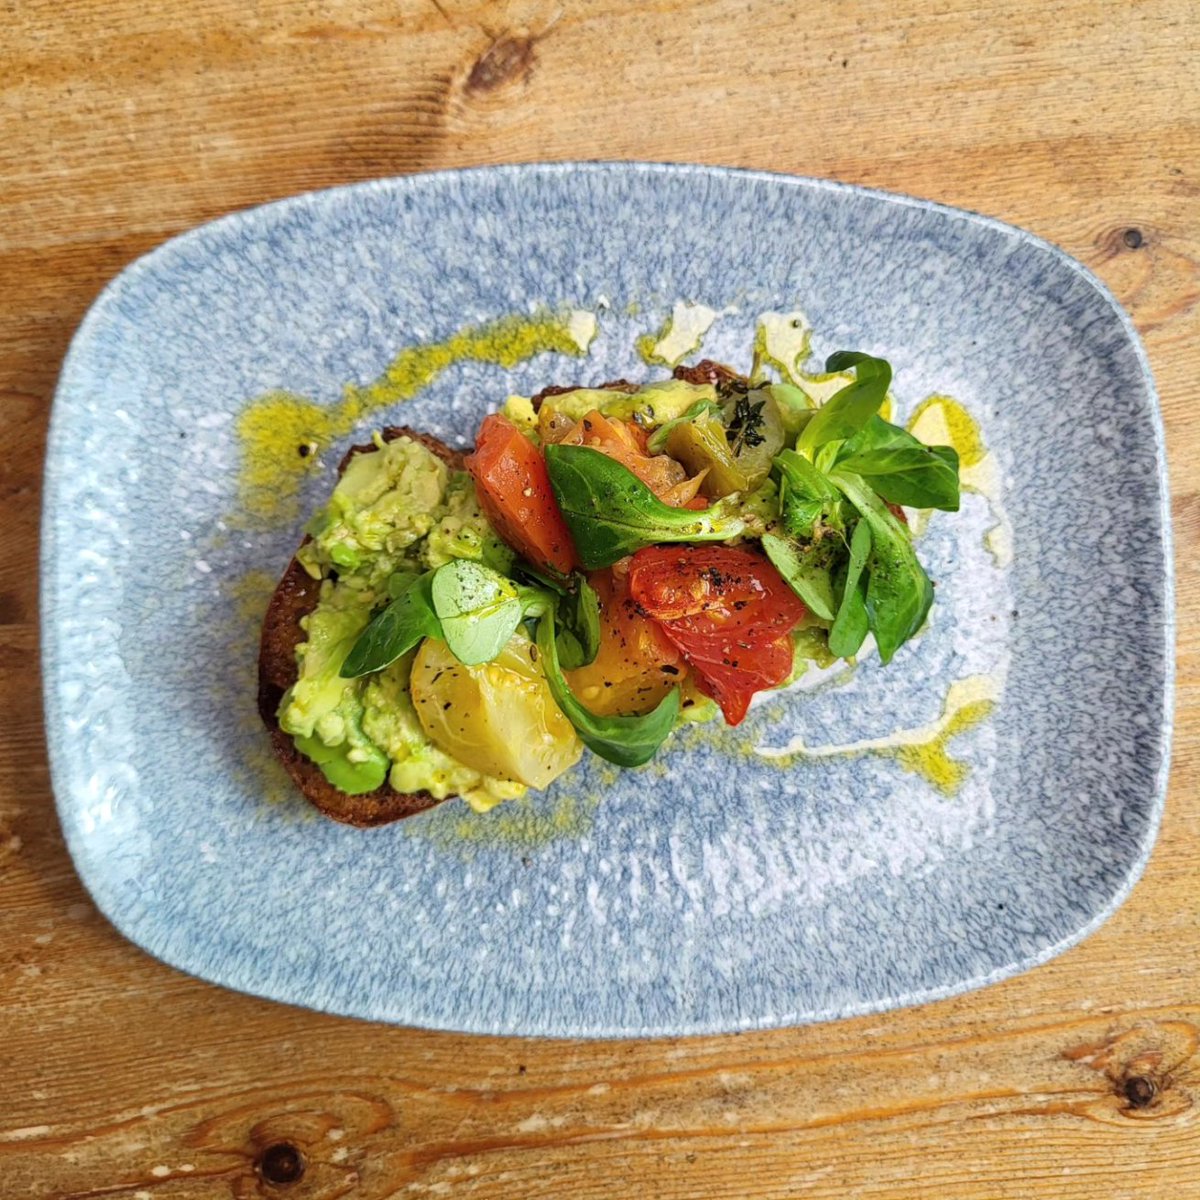 Sometimes a light lunch is all you need 🥑🍅🫛🧄🫒

#lightlunch #lunchmenu #lunchatthepub #publife #youngspubs #avocadotoast #bruschetta #springpea #wildgarlic #hummus #youngspublife #canfordcliffs #poole